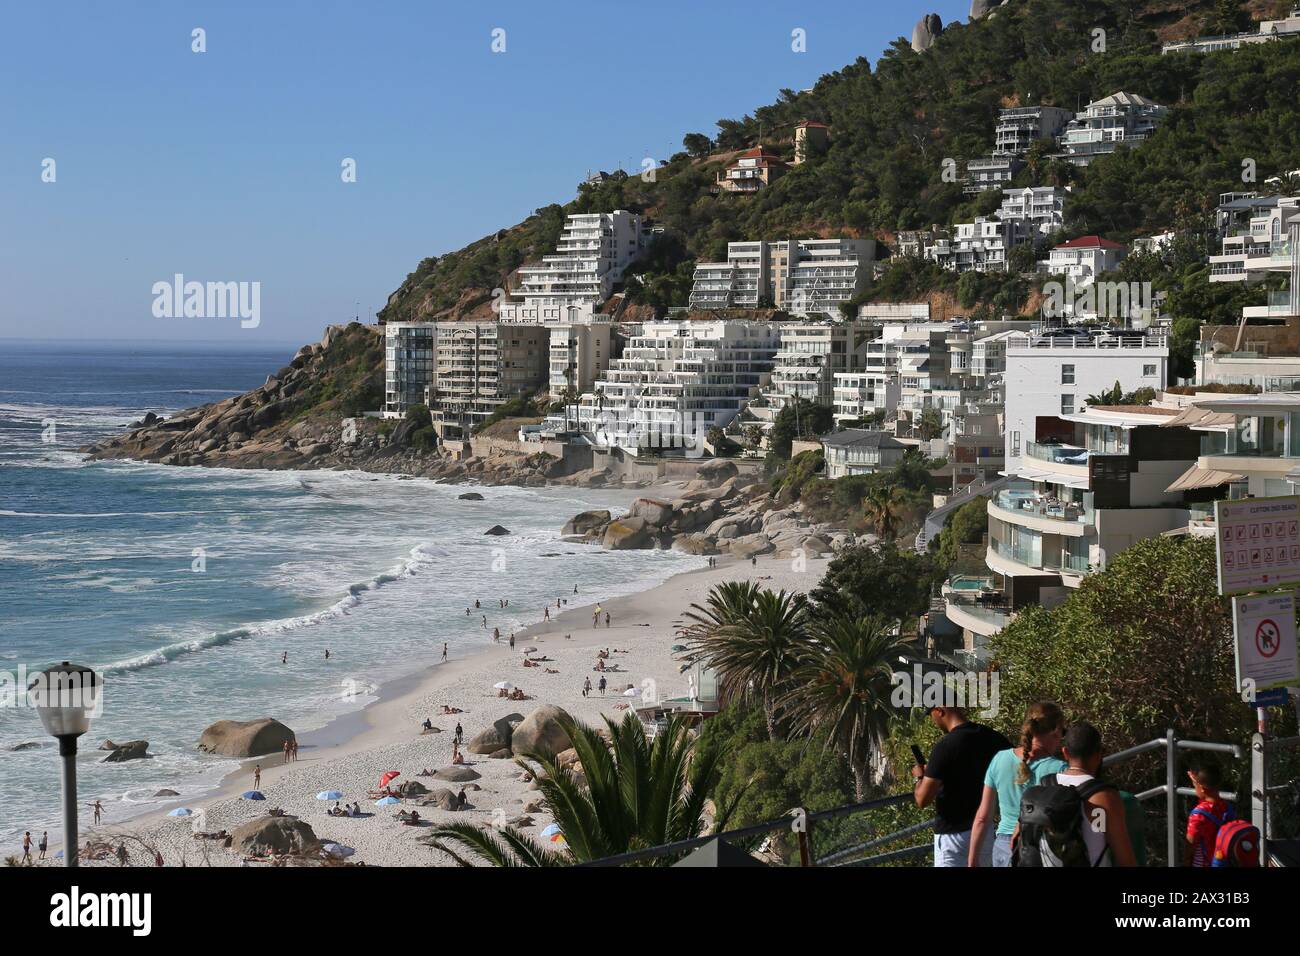 Seafront beaches, Beach Road, Clifton, Cape Town, Table Bay, Western Cape Province, South Africa, Africa Stock Photo